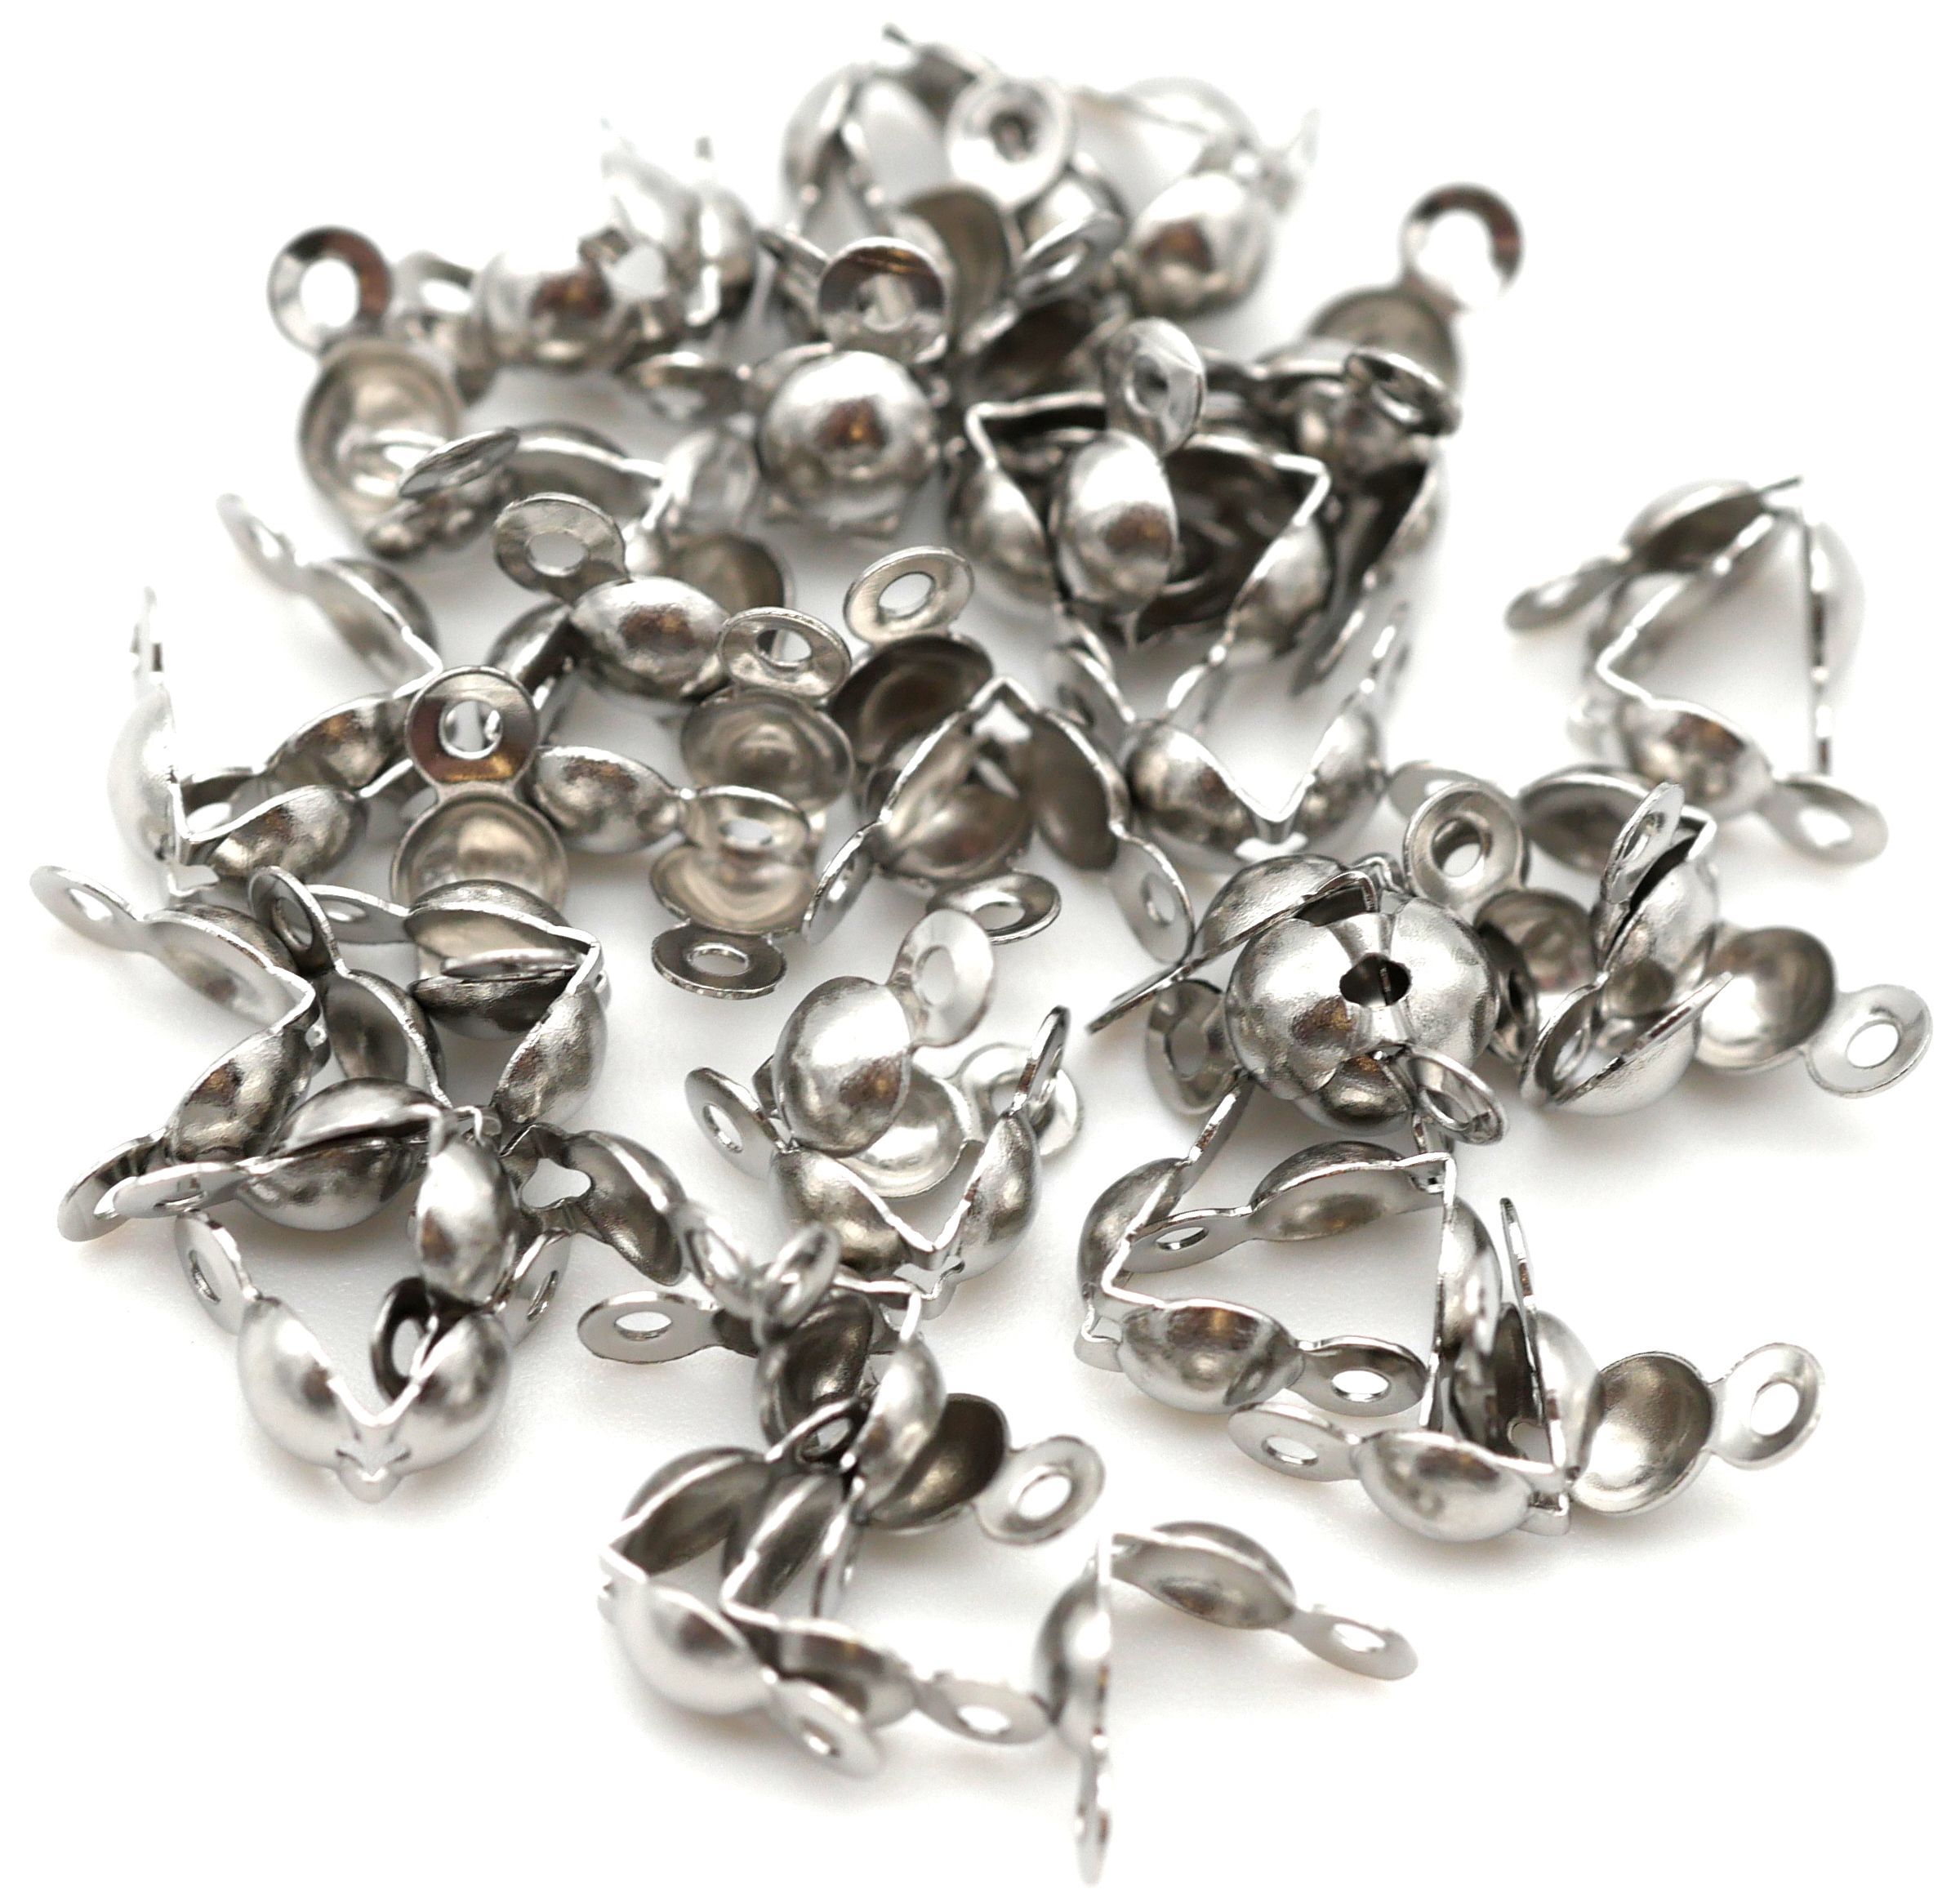 40x Crimp Bead Covers with Loop Silver 4mm Clamshell Tips Calottes End Cap  Clamp